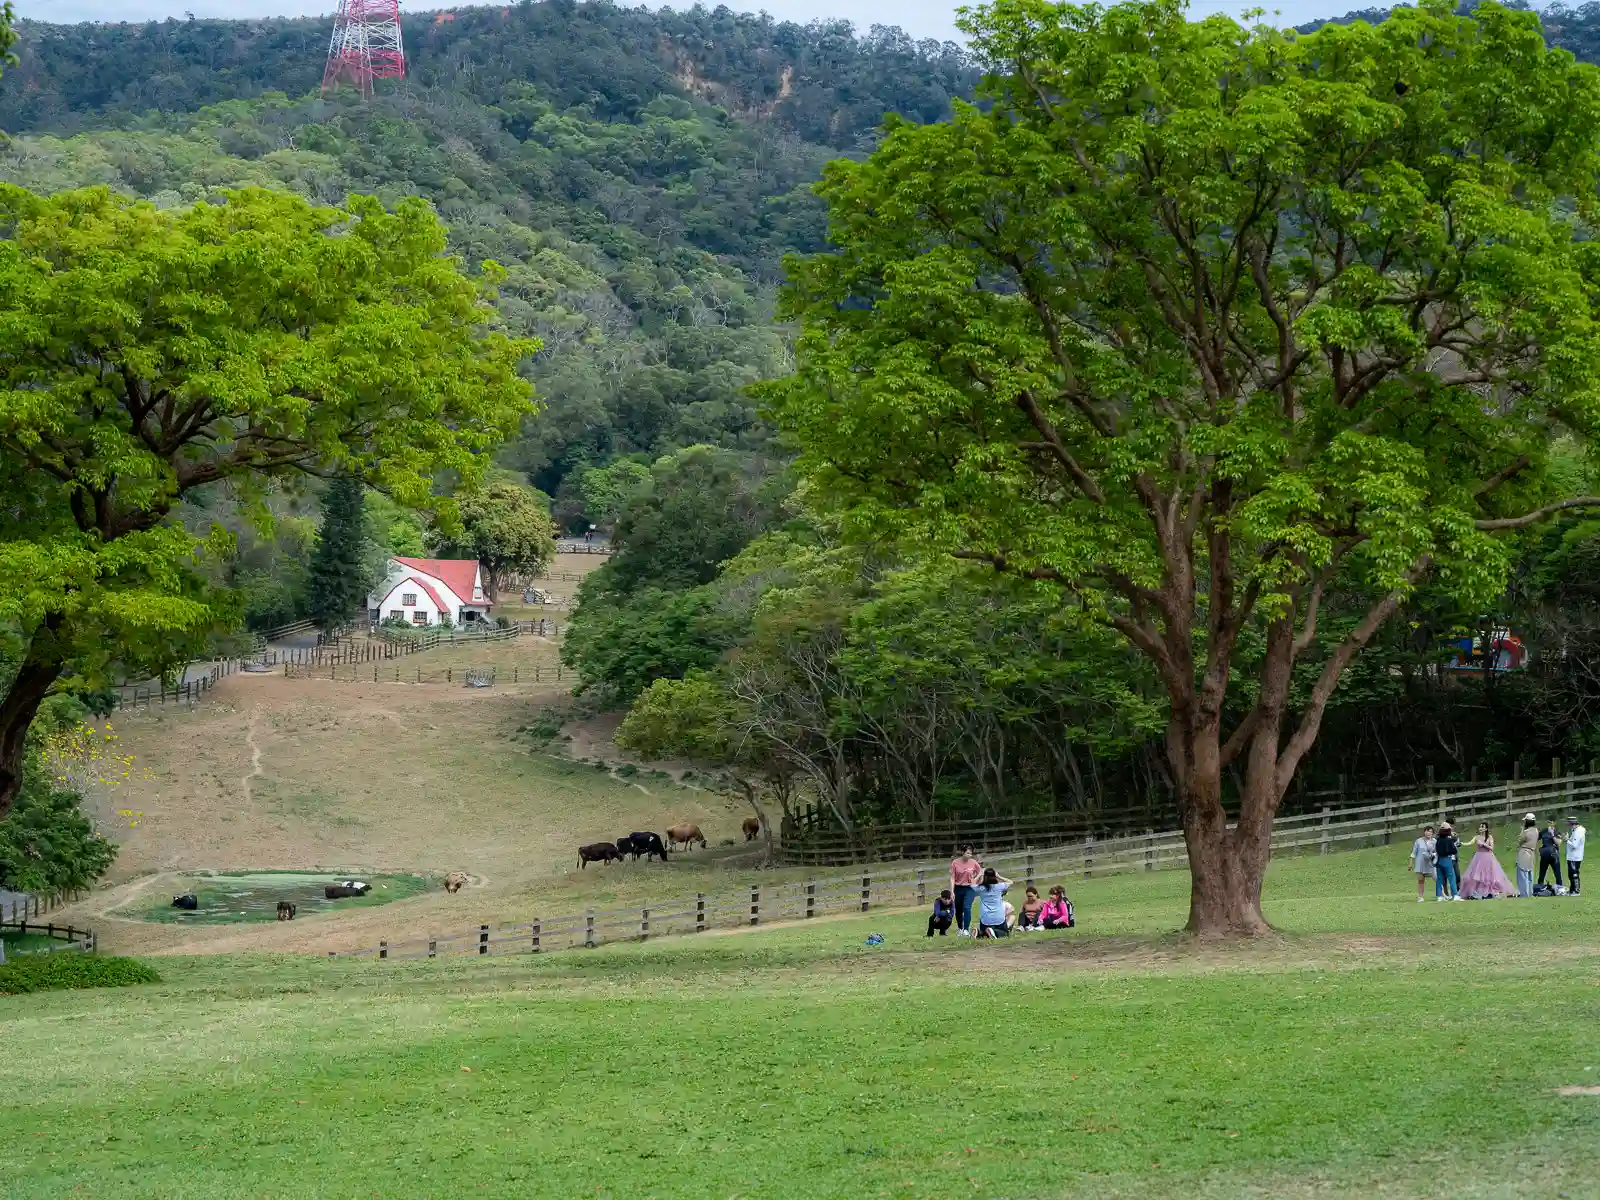 A grassy lawn extends across rolling hills, a shed and fences can be seen in the distance.